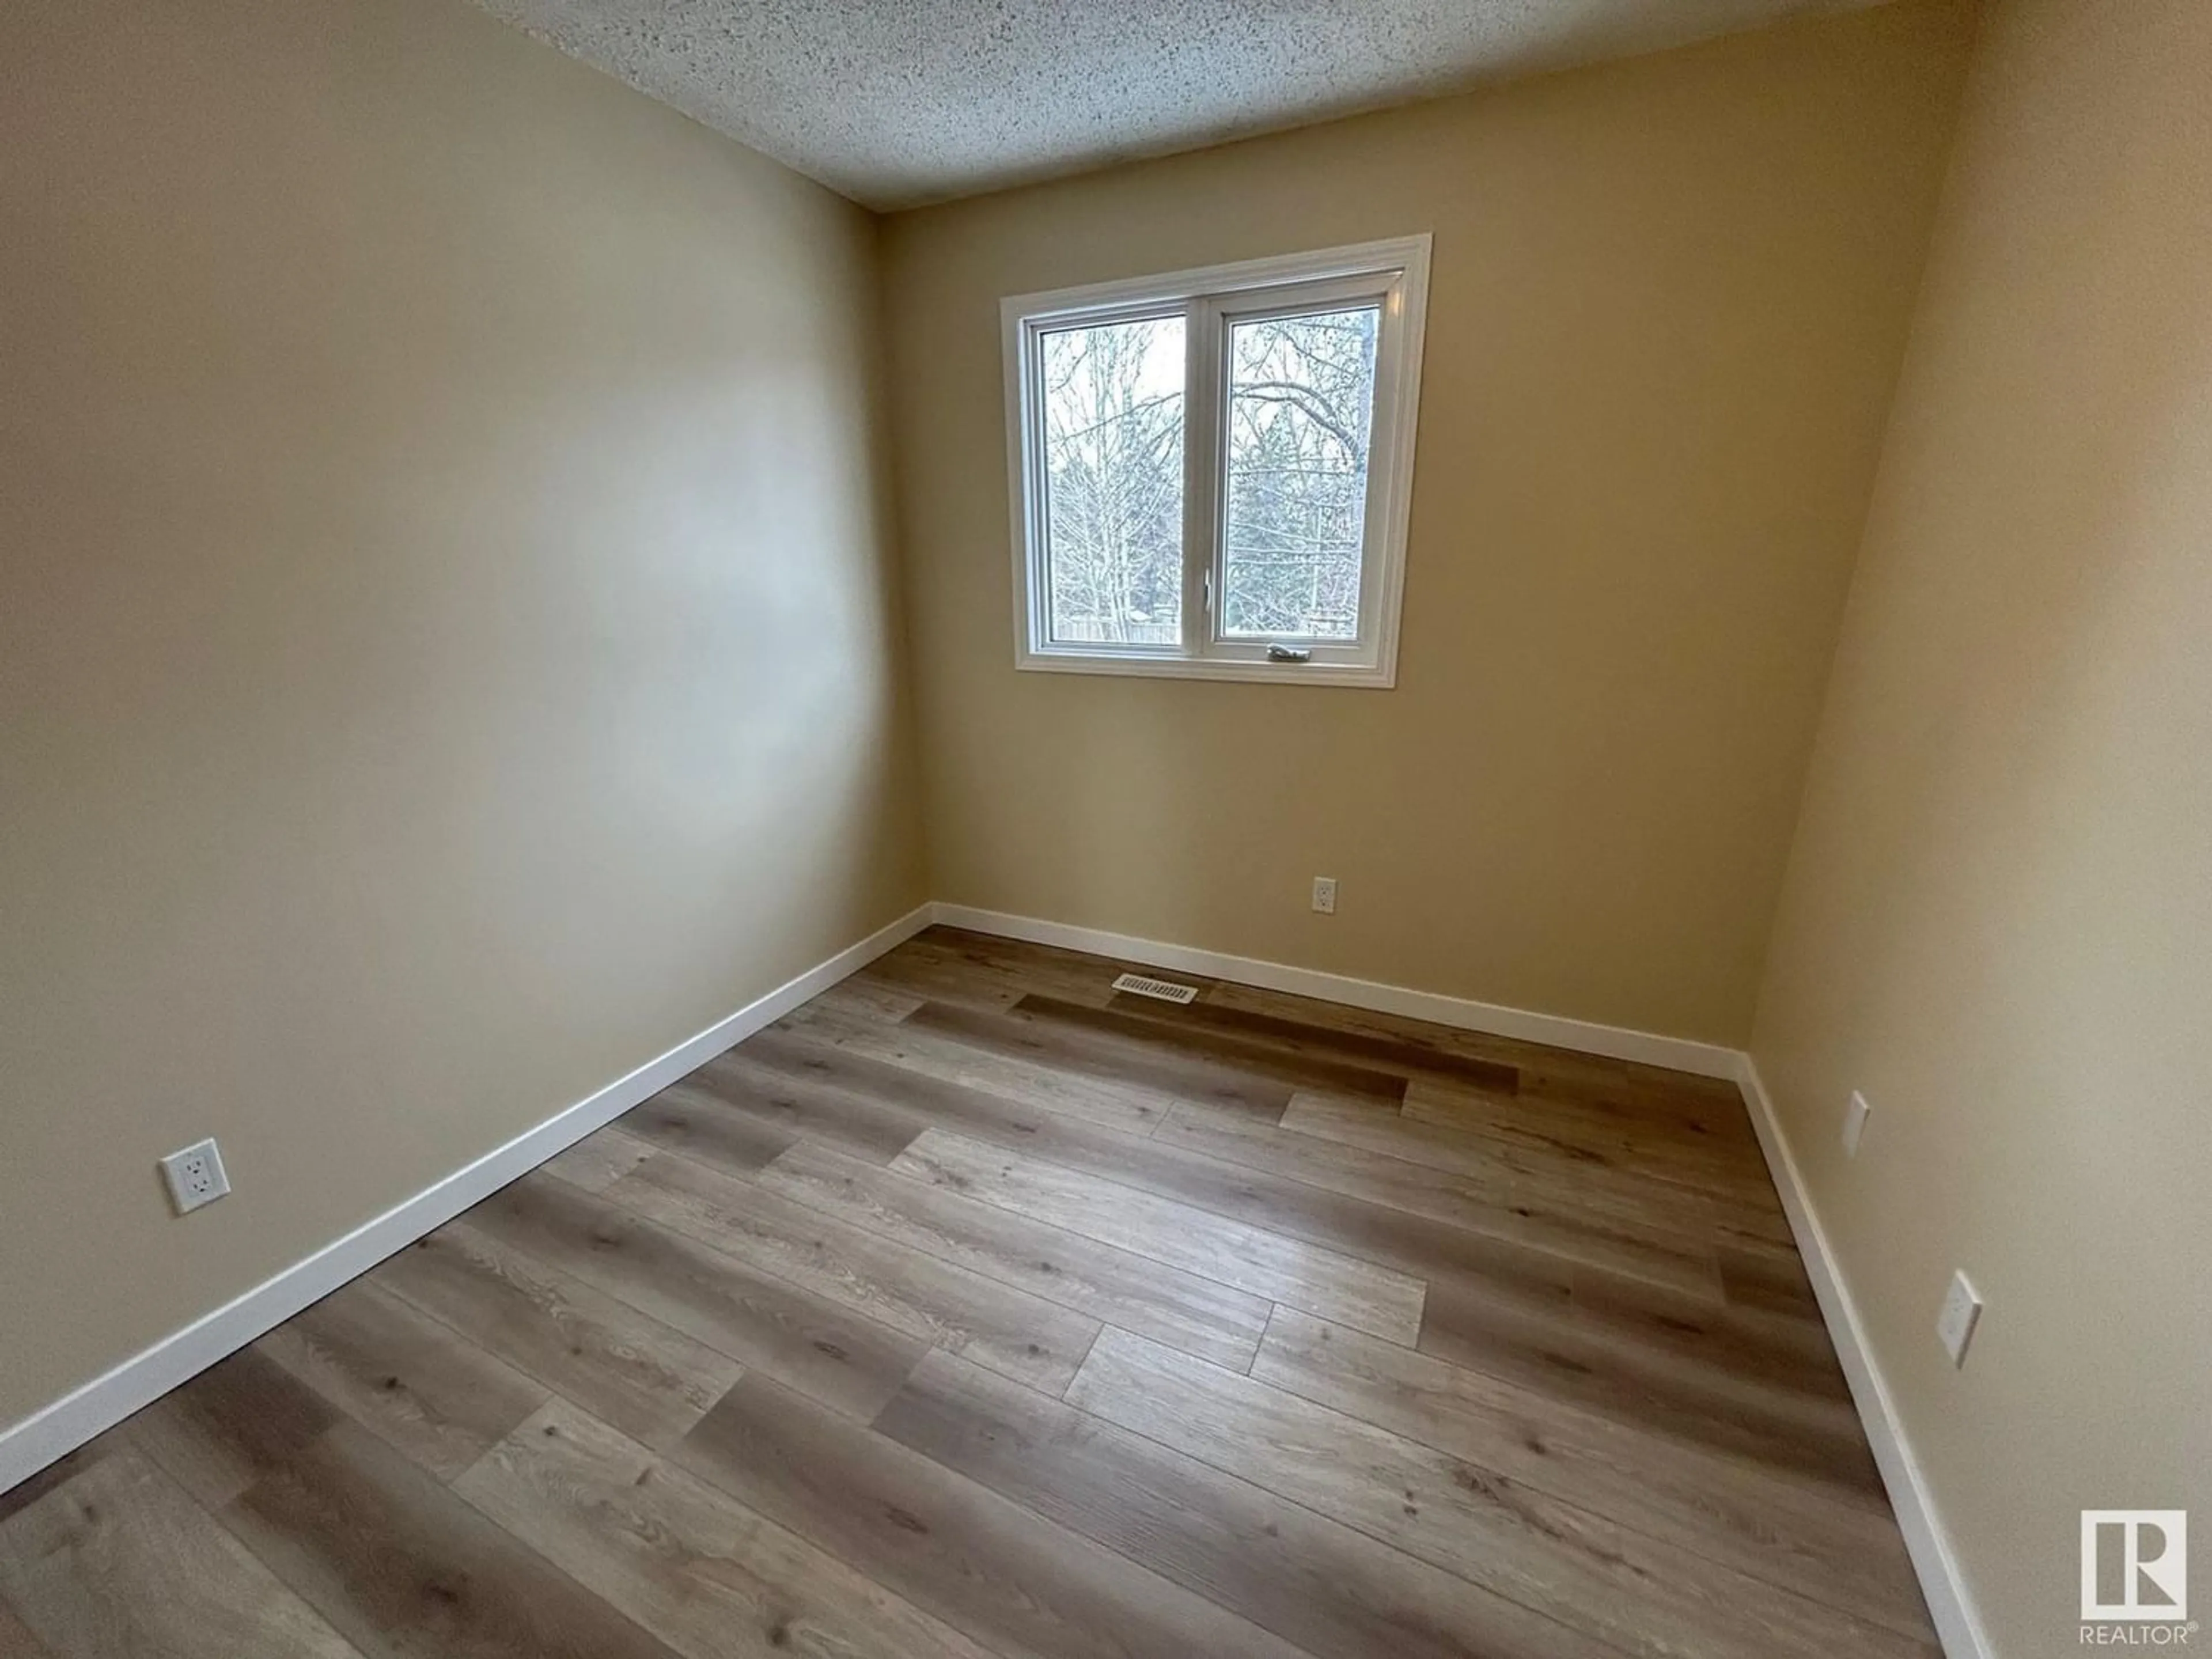 A pic of a room for #76 3115 119 ST NW, Edmonton Alberta T6J5N5